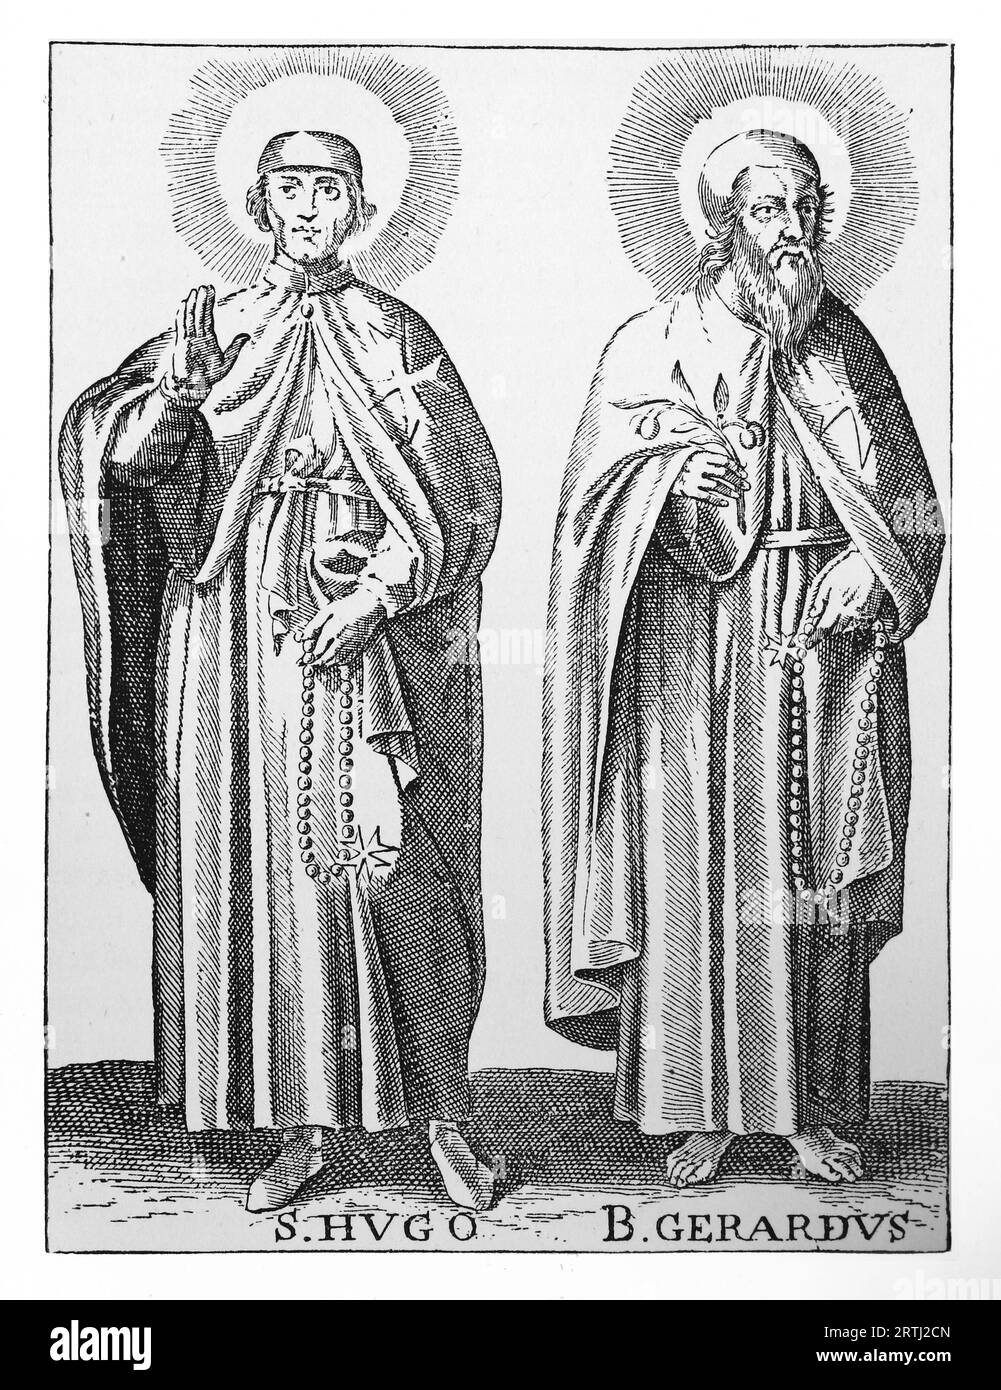 St Hugo and St Gerardus. Engraving from Lives of the Saints (May) by Sabin Baring-Gould, 1897. Stock Photo